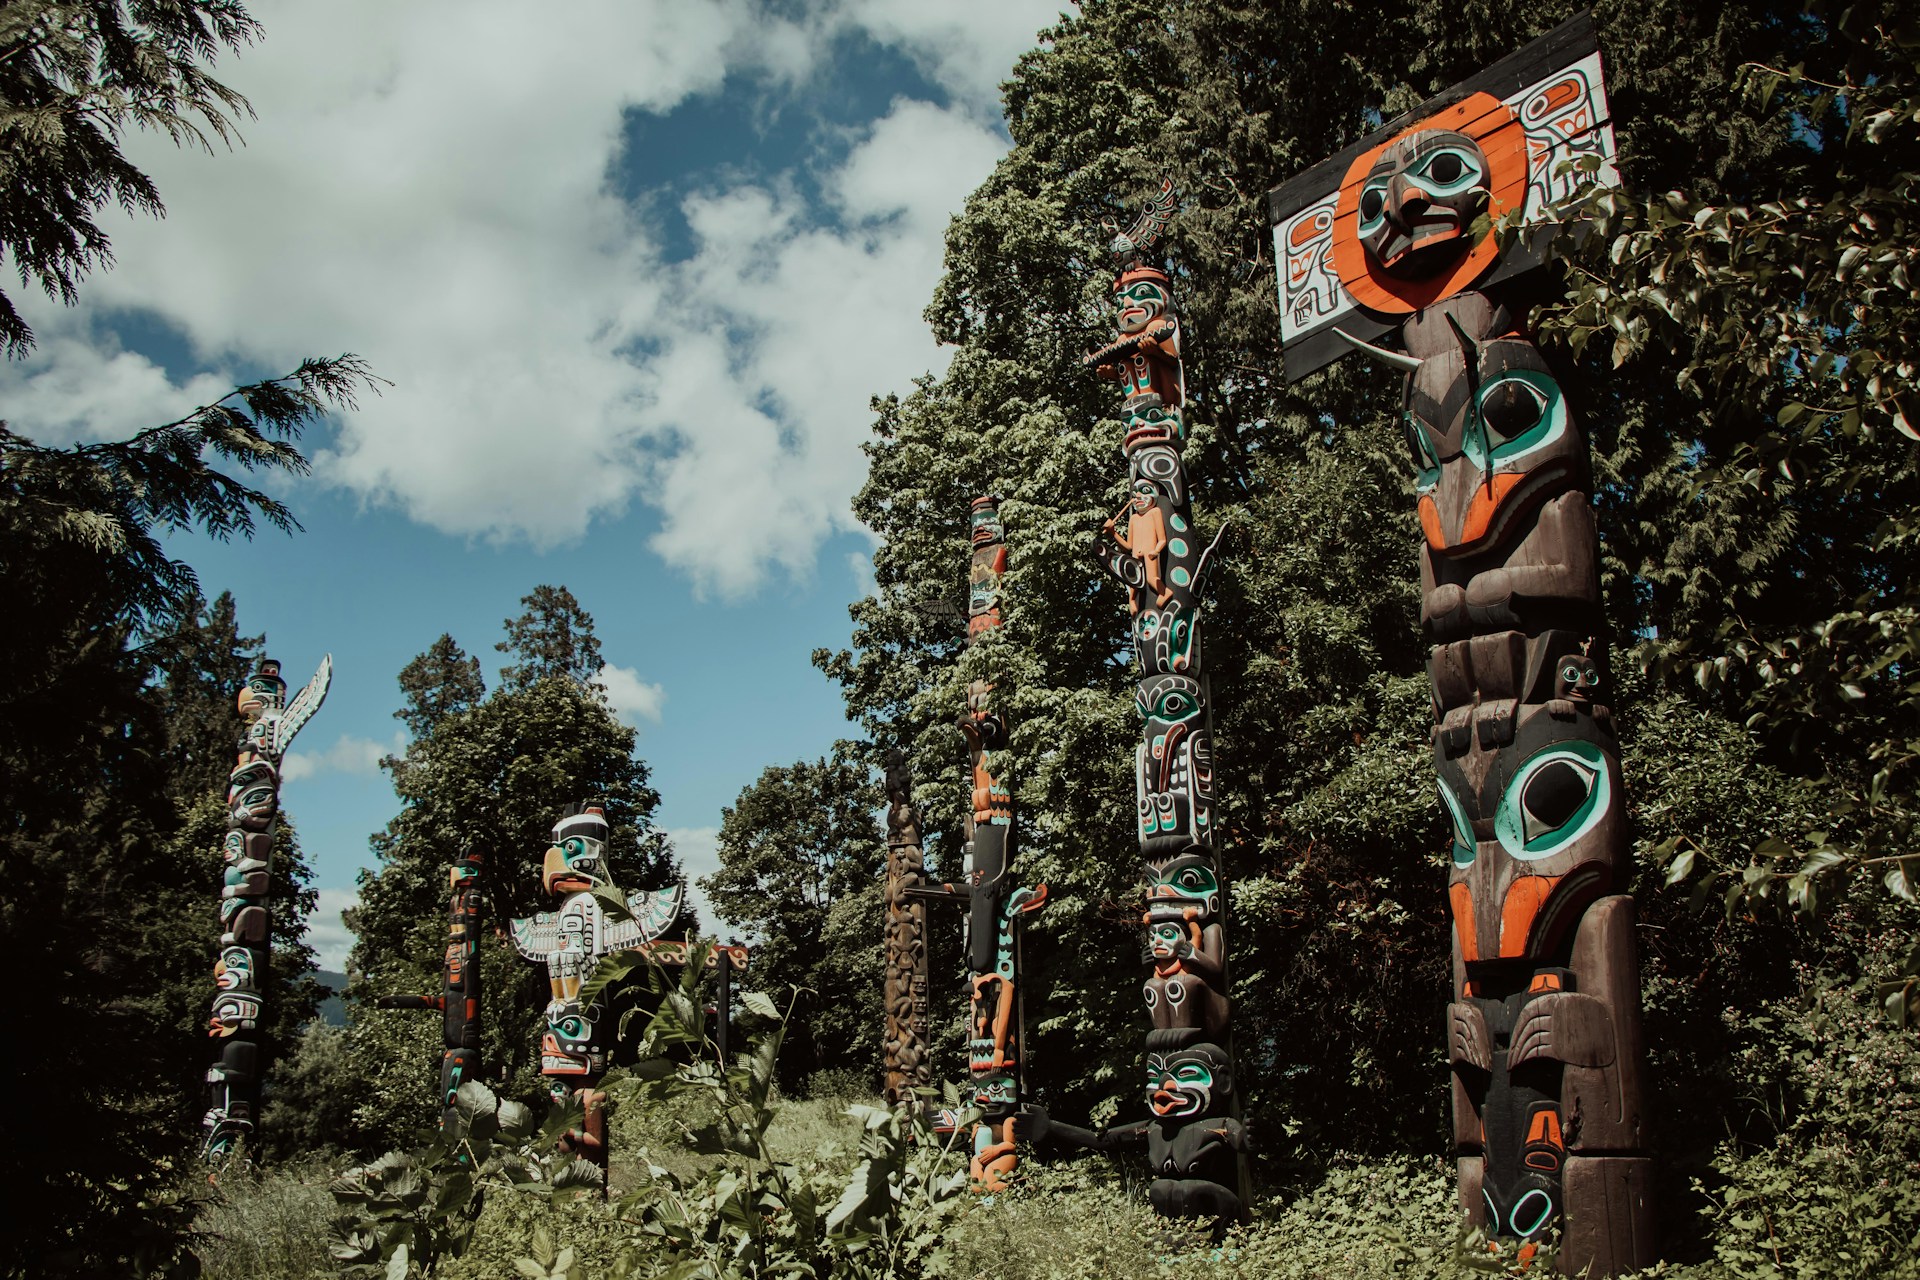 Stanley Park totem poles, photographed from a low angle looking up 